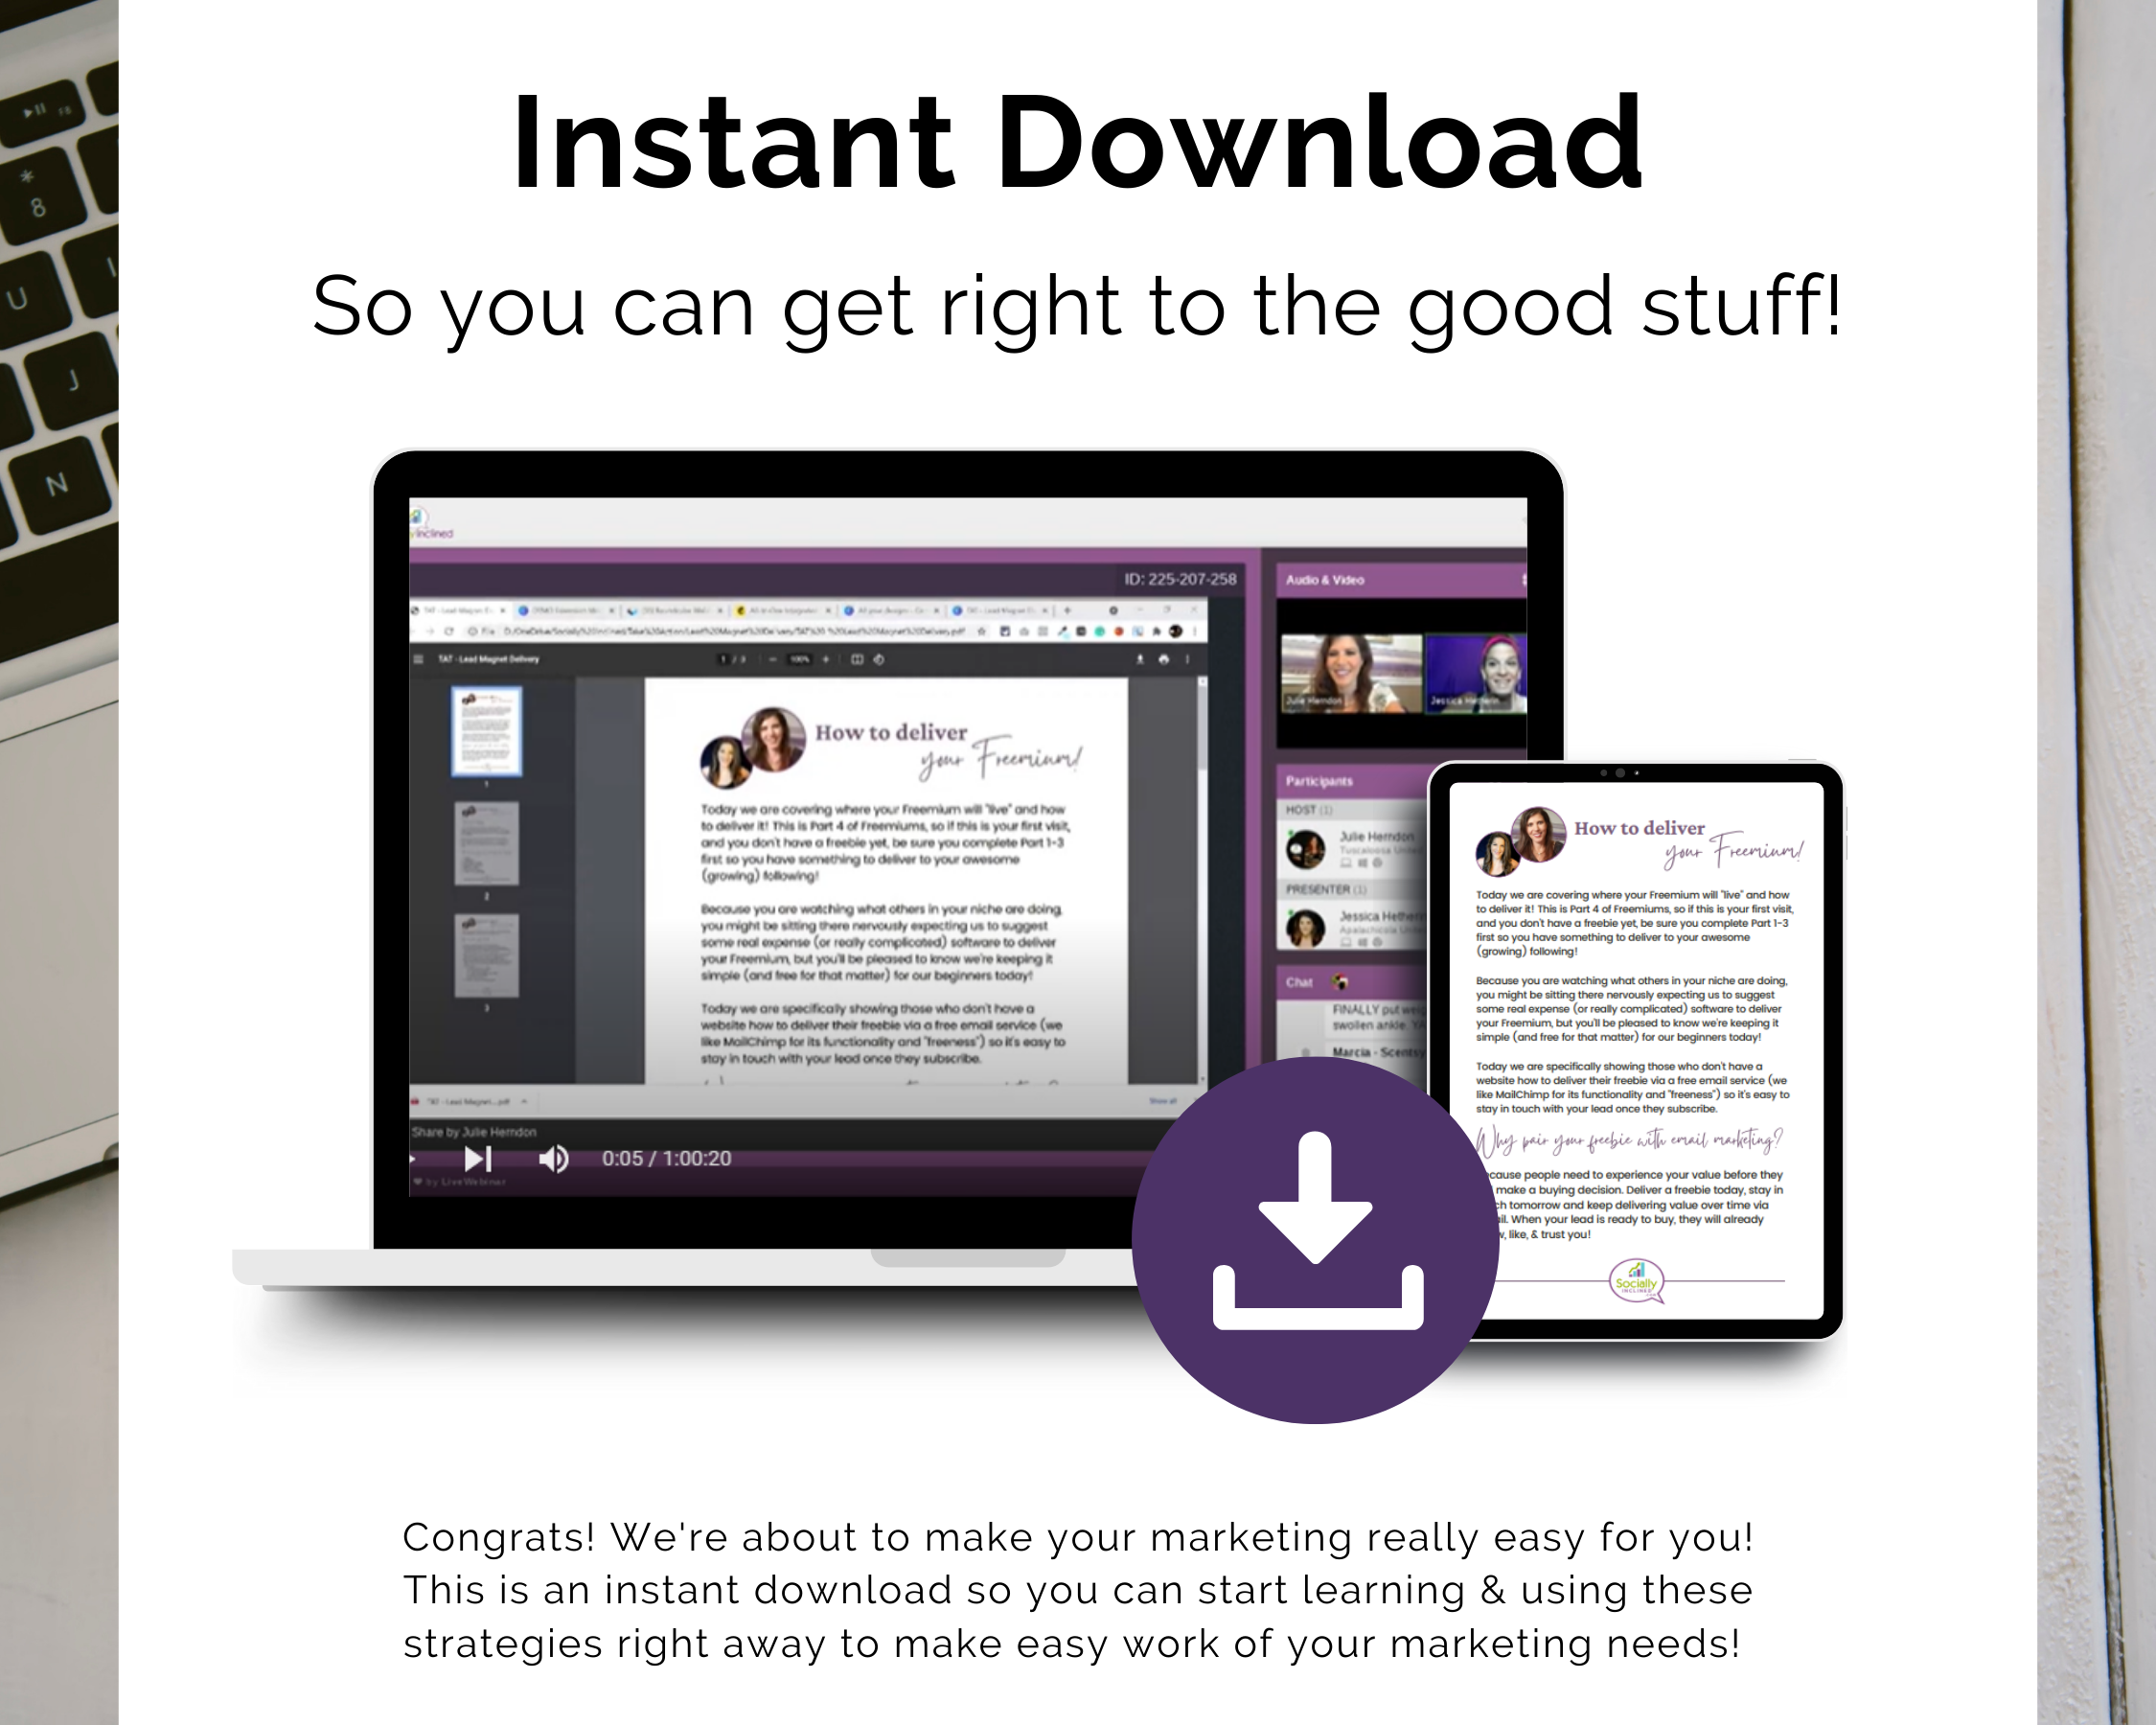 Instant download of the TAT -Lead Magnet - Deliver Your Freemium Masterclass from Get Socially Inclined, allowing you to quickly access all the good stuff.